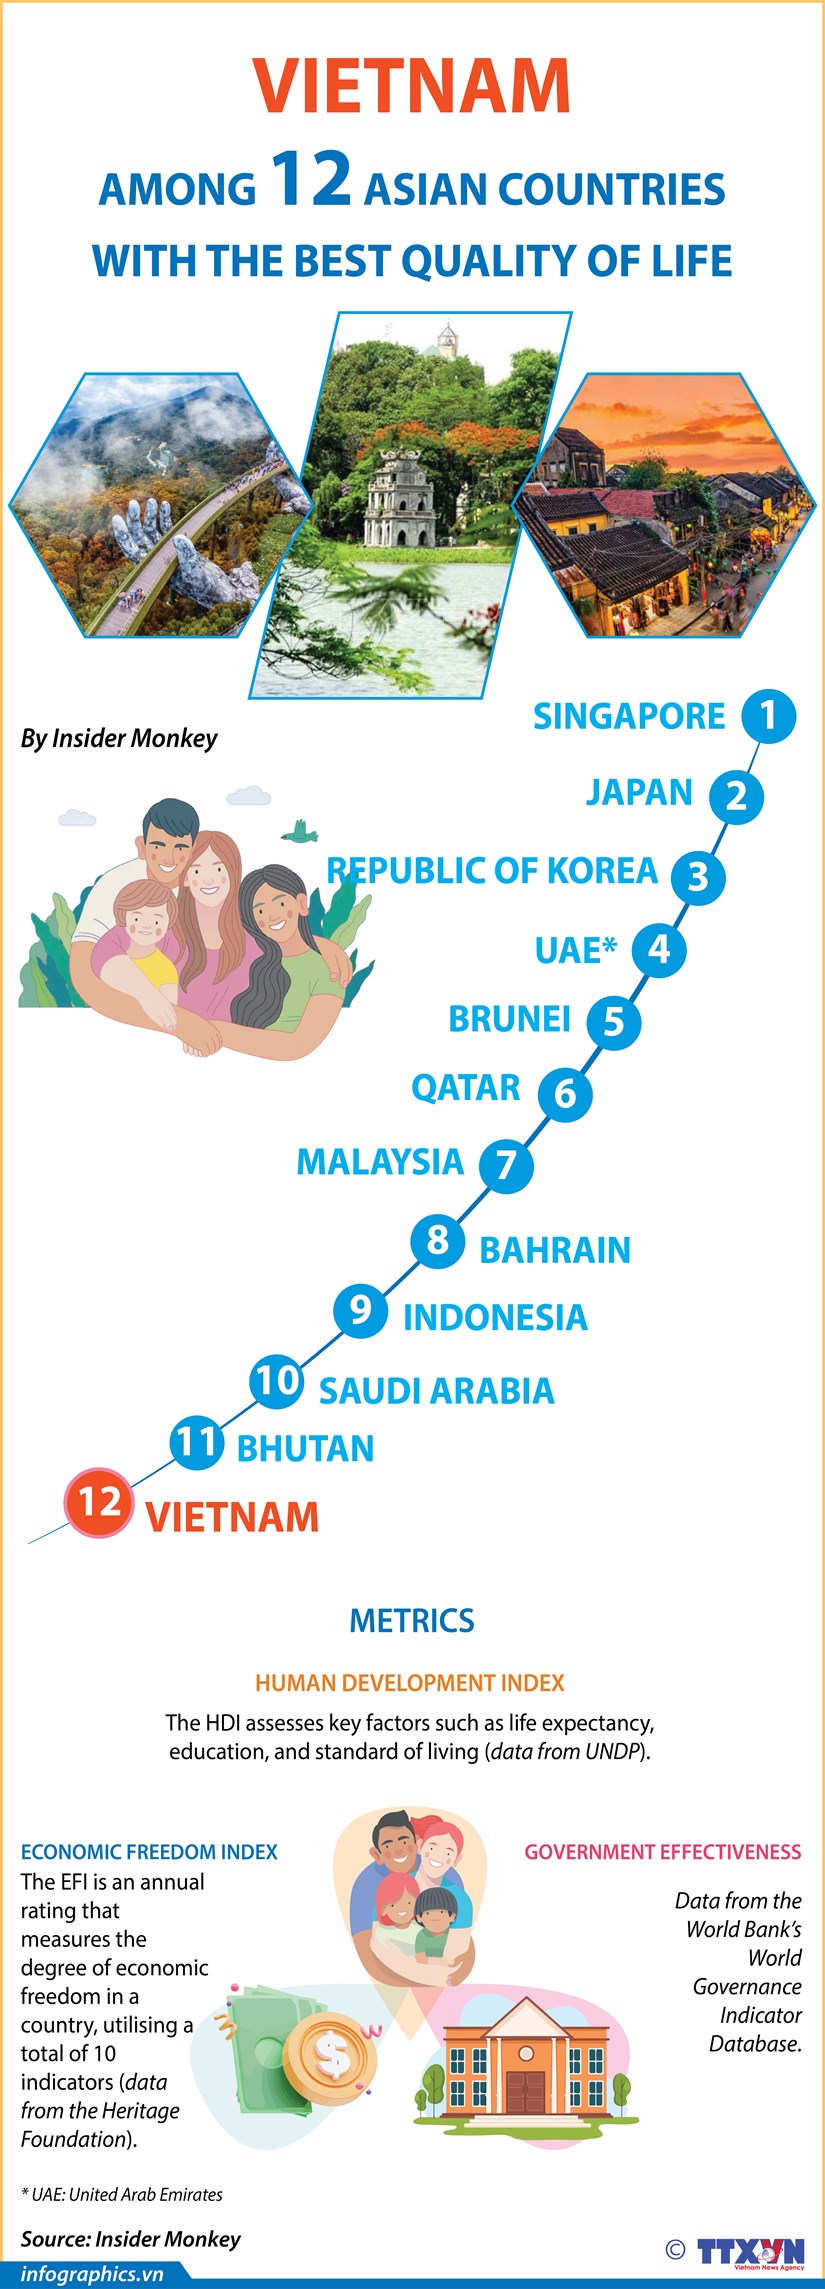 Vietnam listed among 12 Asian countries with the best quality of life hinh anh 1